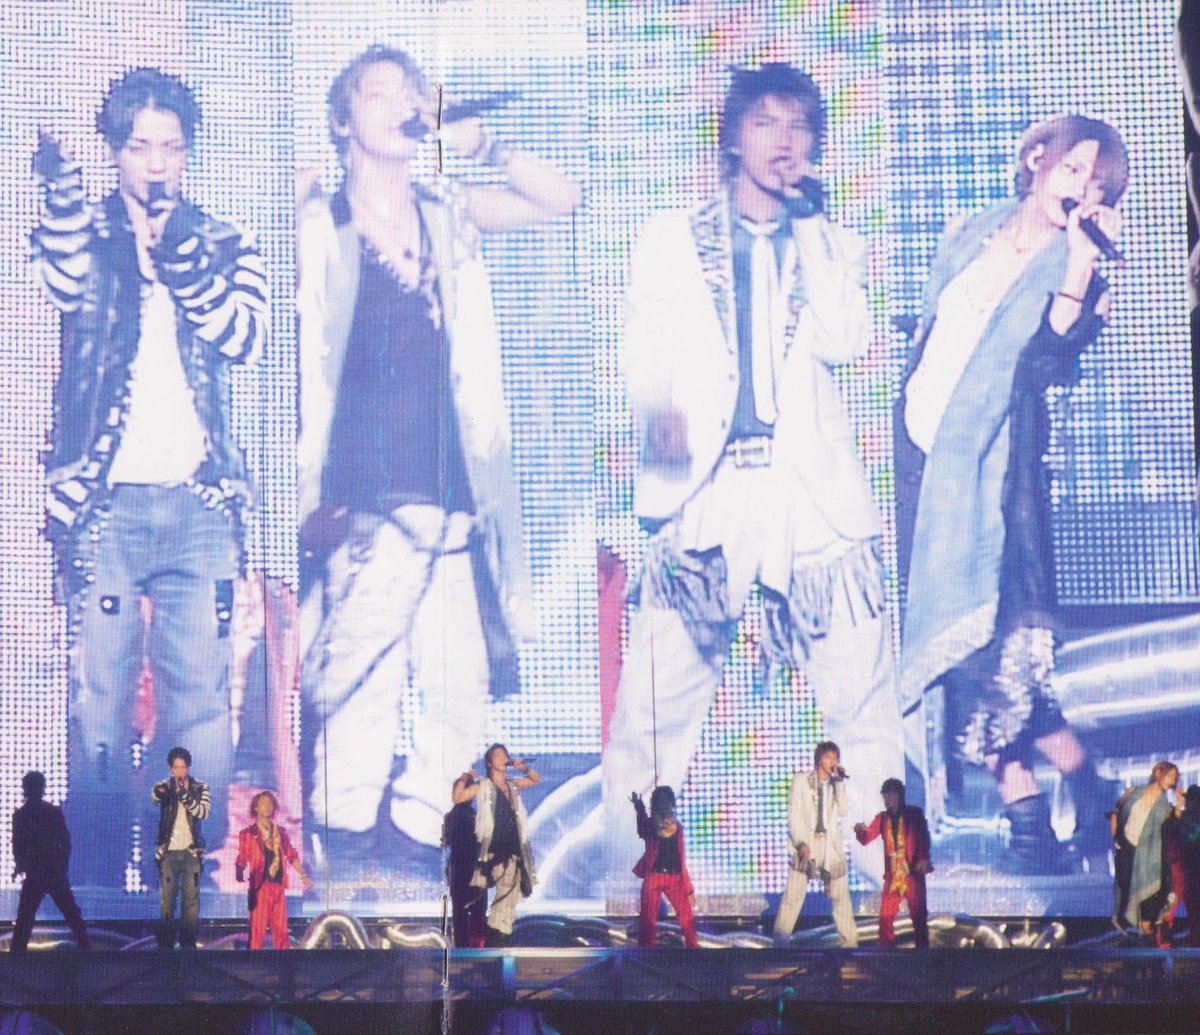 Would you rather that KATTUN's 4nin era was with Koki instead of Junno?